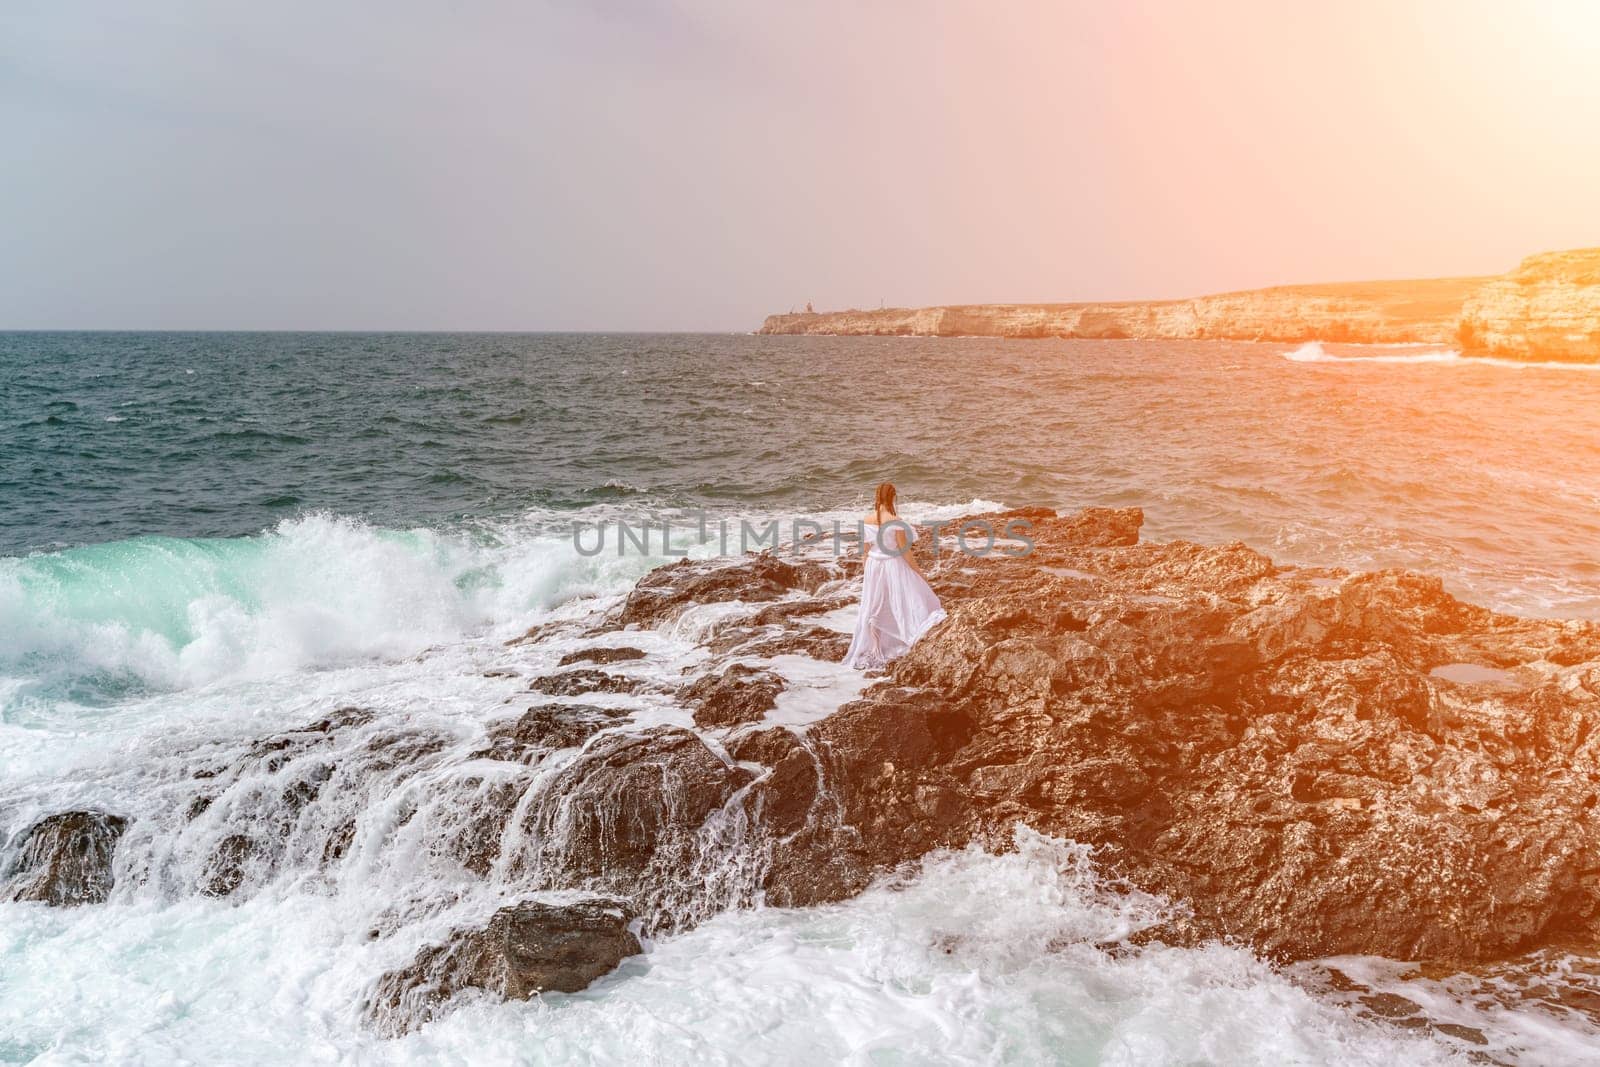 A woman stands on a rock in the sea during a storm. Dressed in a white long dress, the waves break on the rocks and white spray rises. by Matiunina